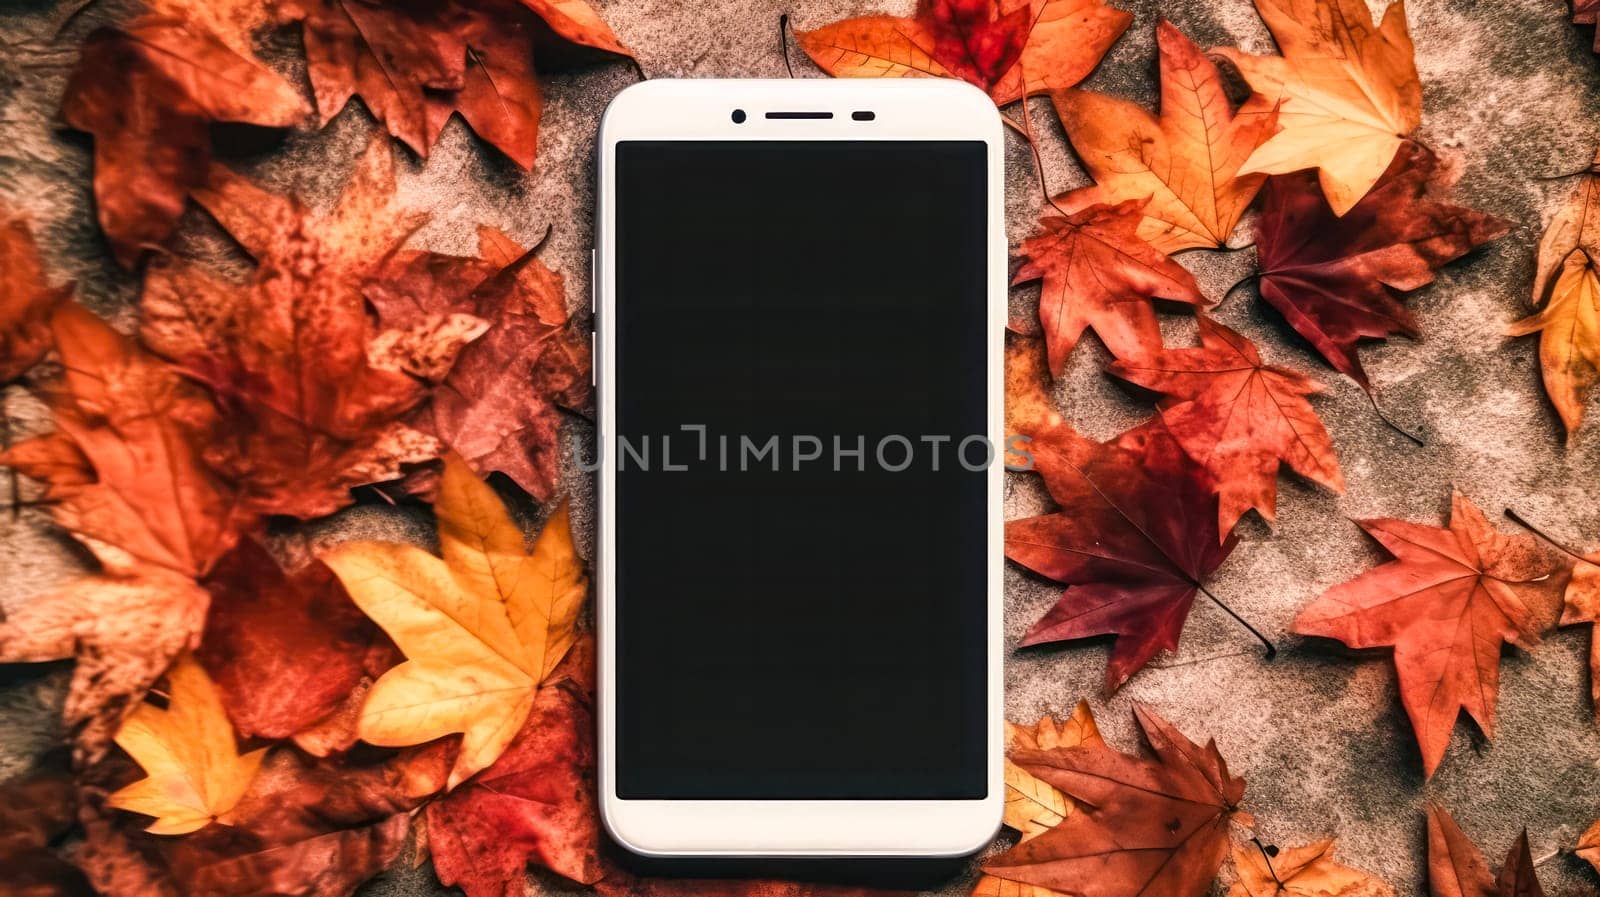 Mockup of a phone with a blank black screen, perfect for showcasing app designs, website layouts, or digital content in a professional manner.